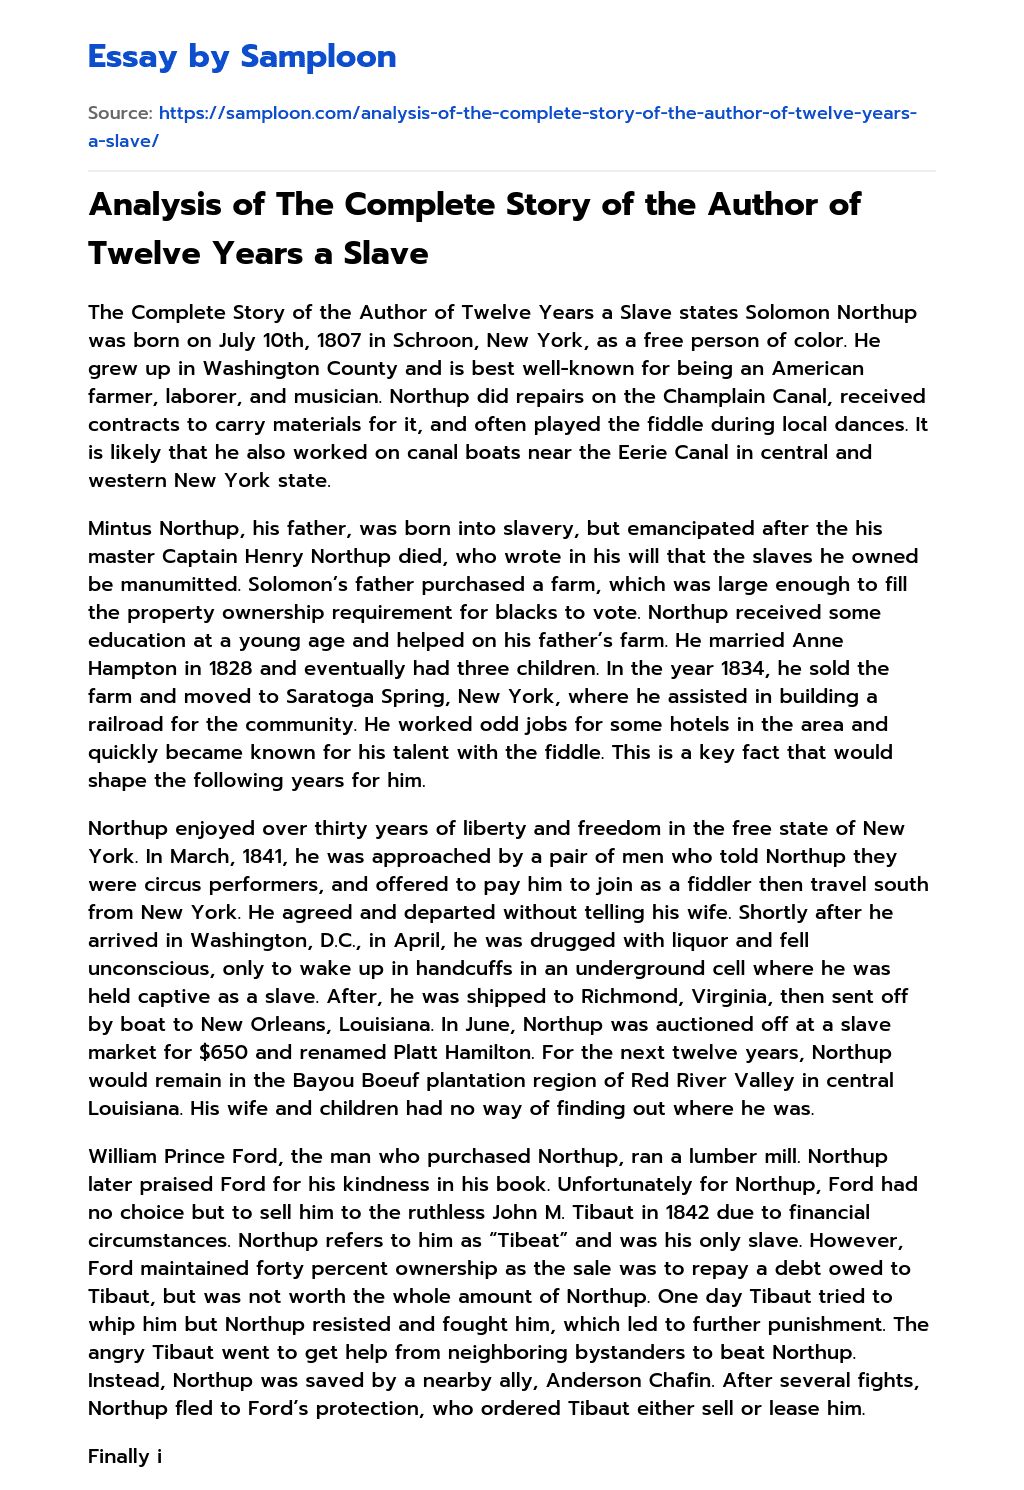 Analysis of The Complete Story of the Author of Twelve Years a Slave Summary essay